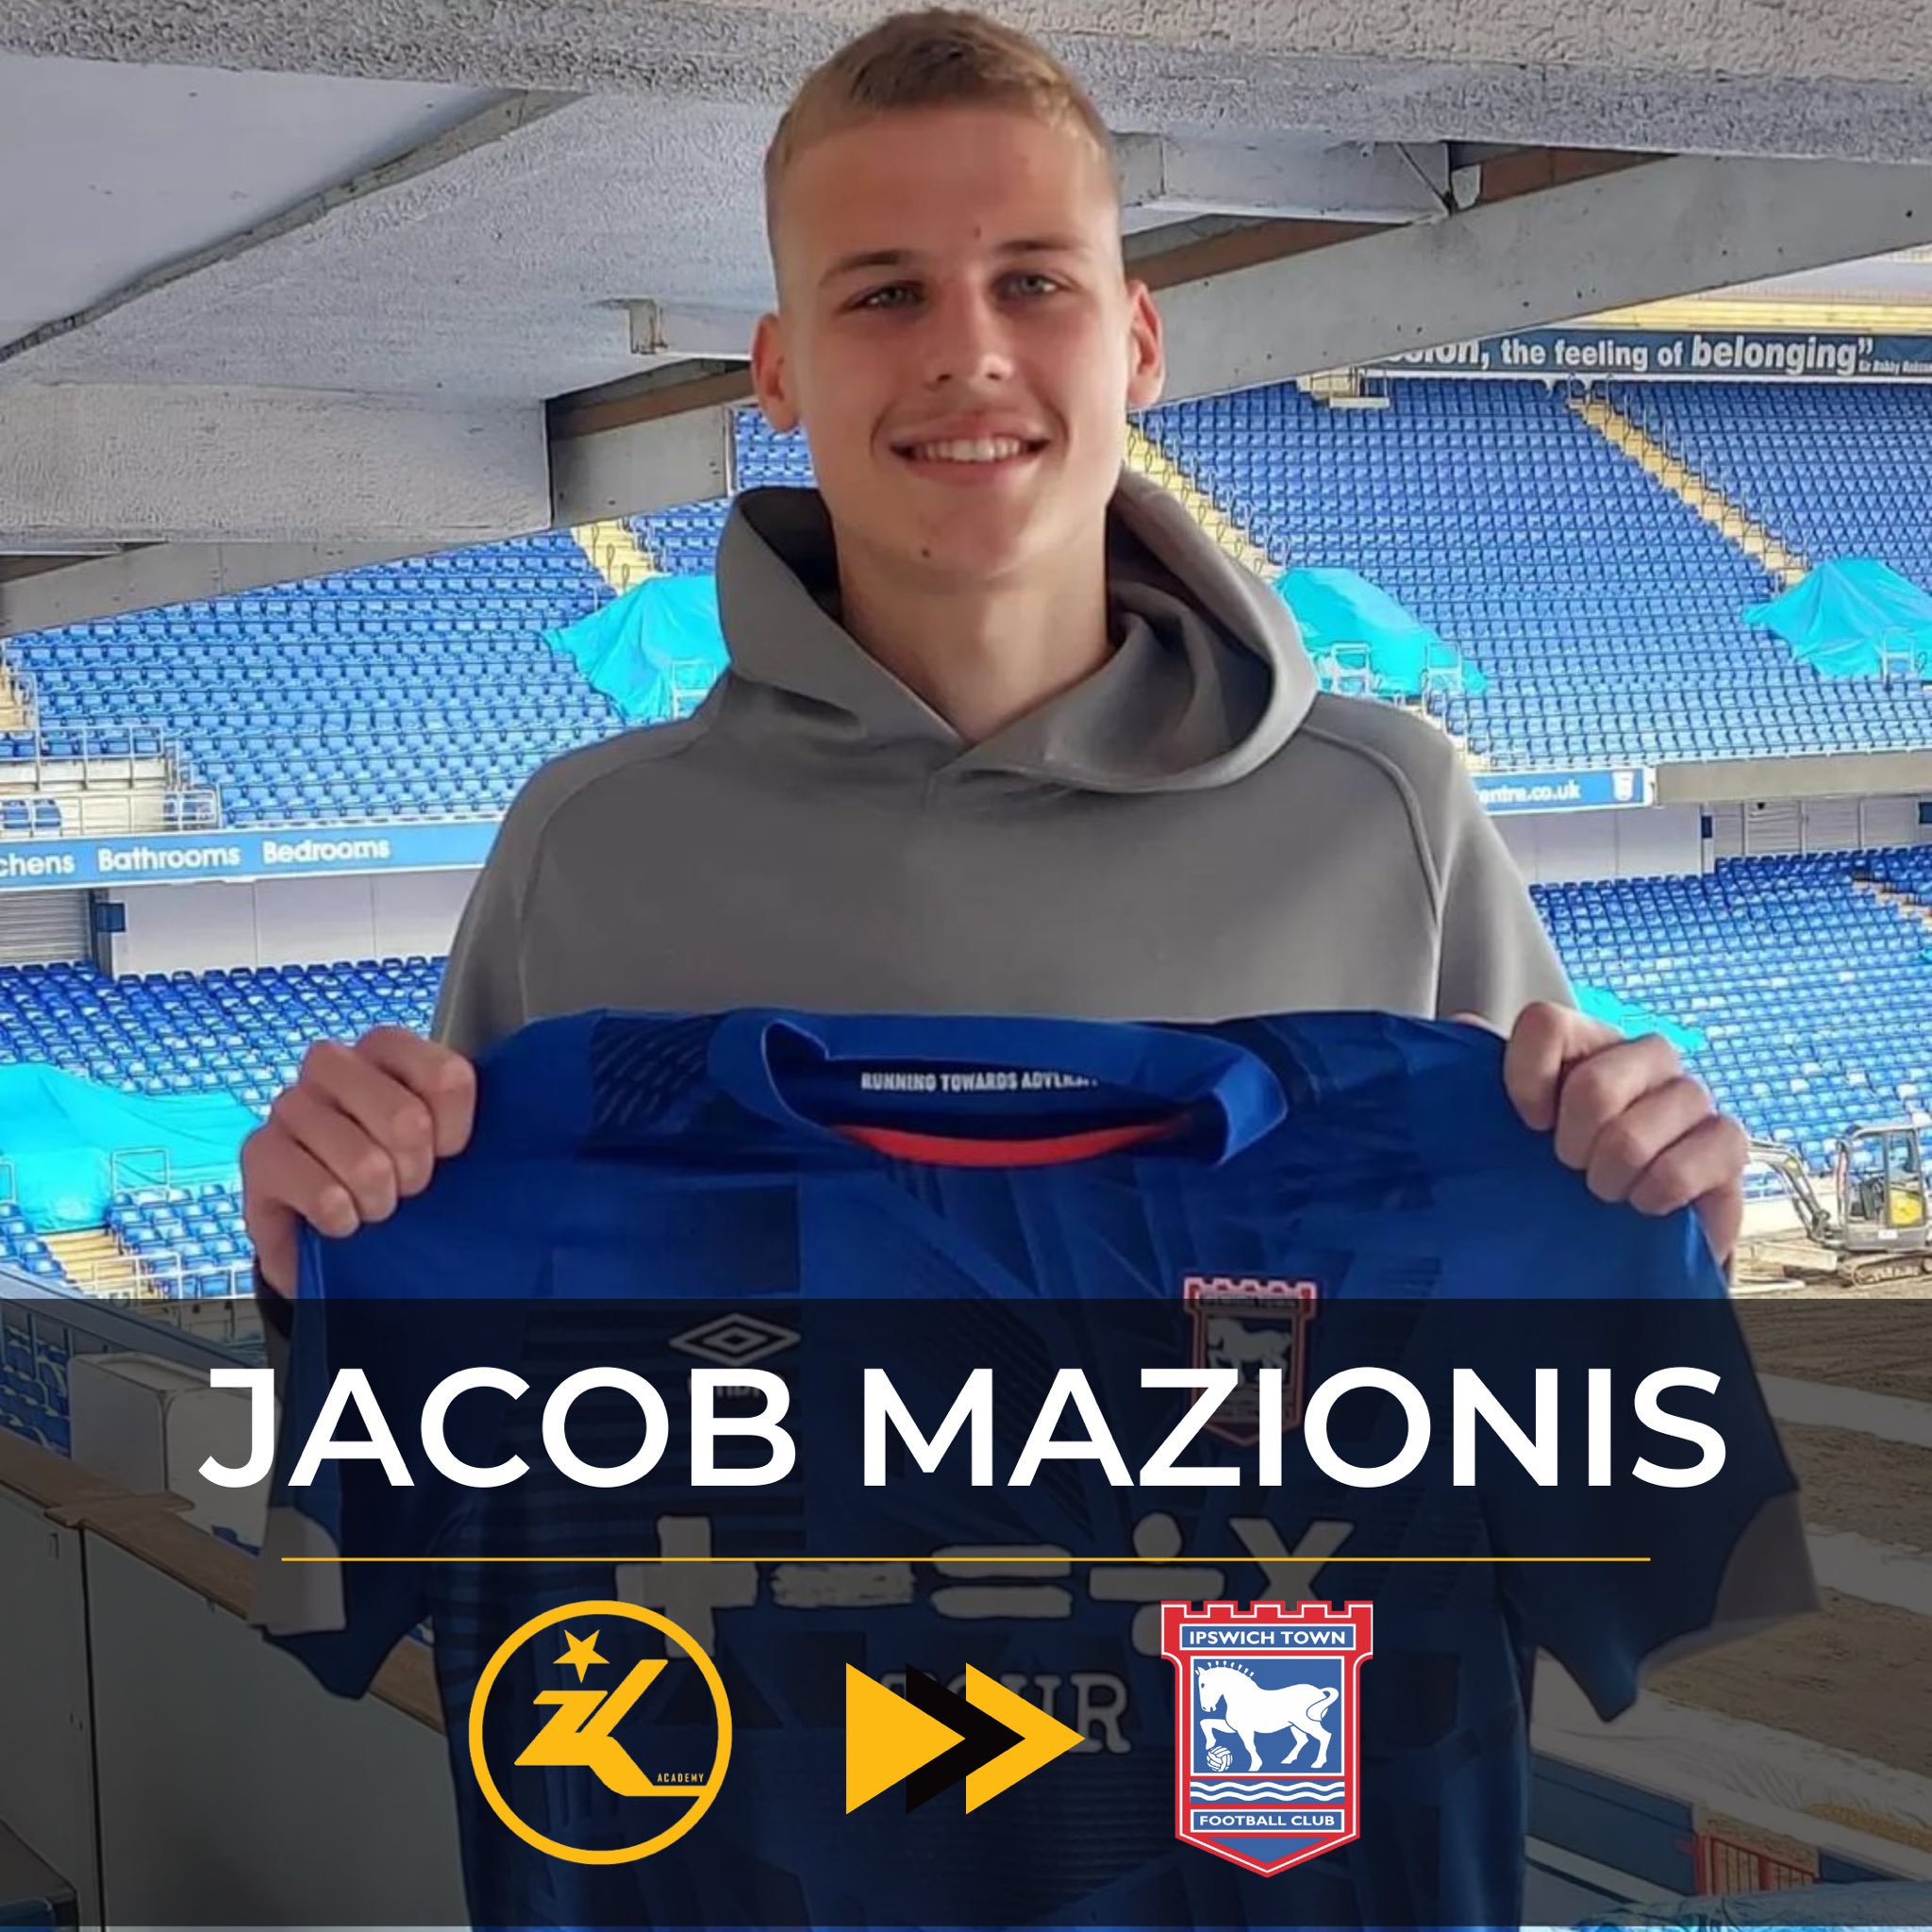 Jacob Mazionis signs for Ipswich Town FC